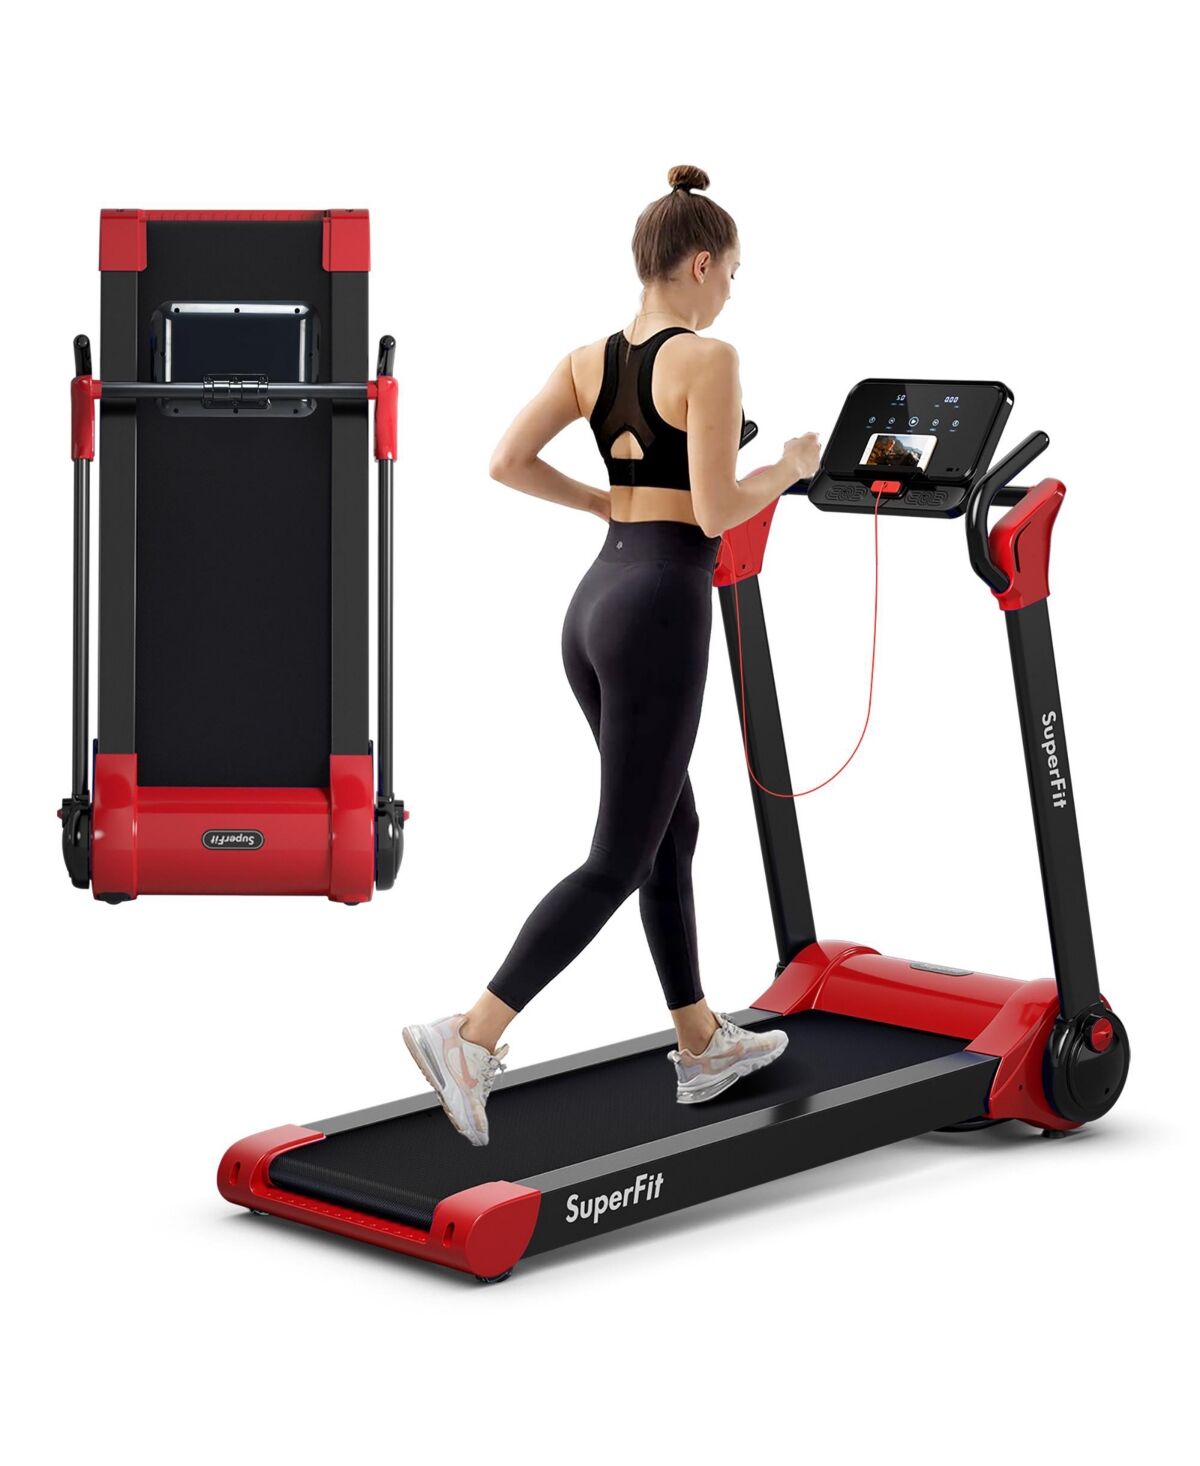 Costway 2.25HP Electric Treadmill Running Machine App Control for Home Office - Red